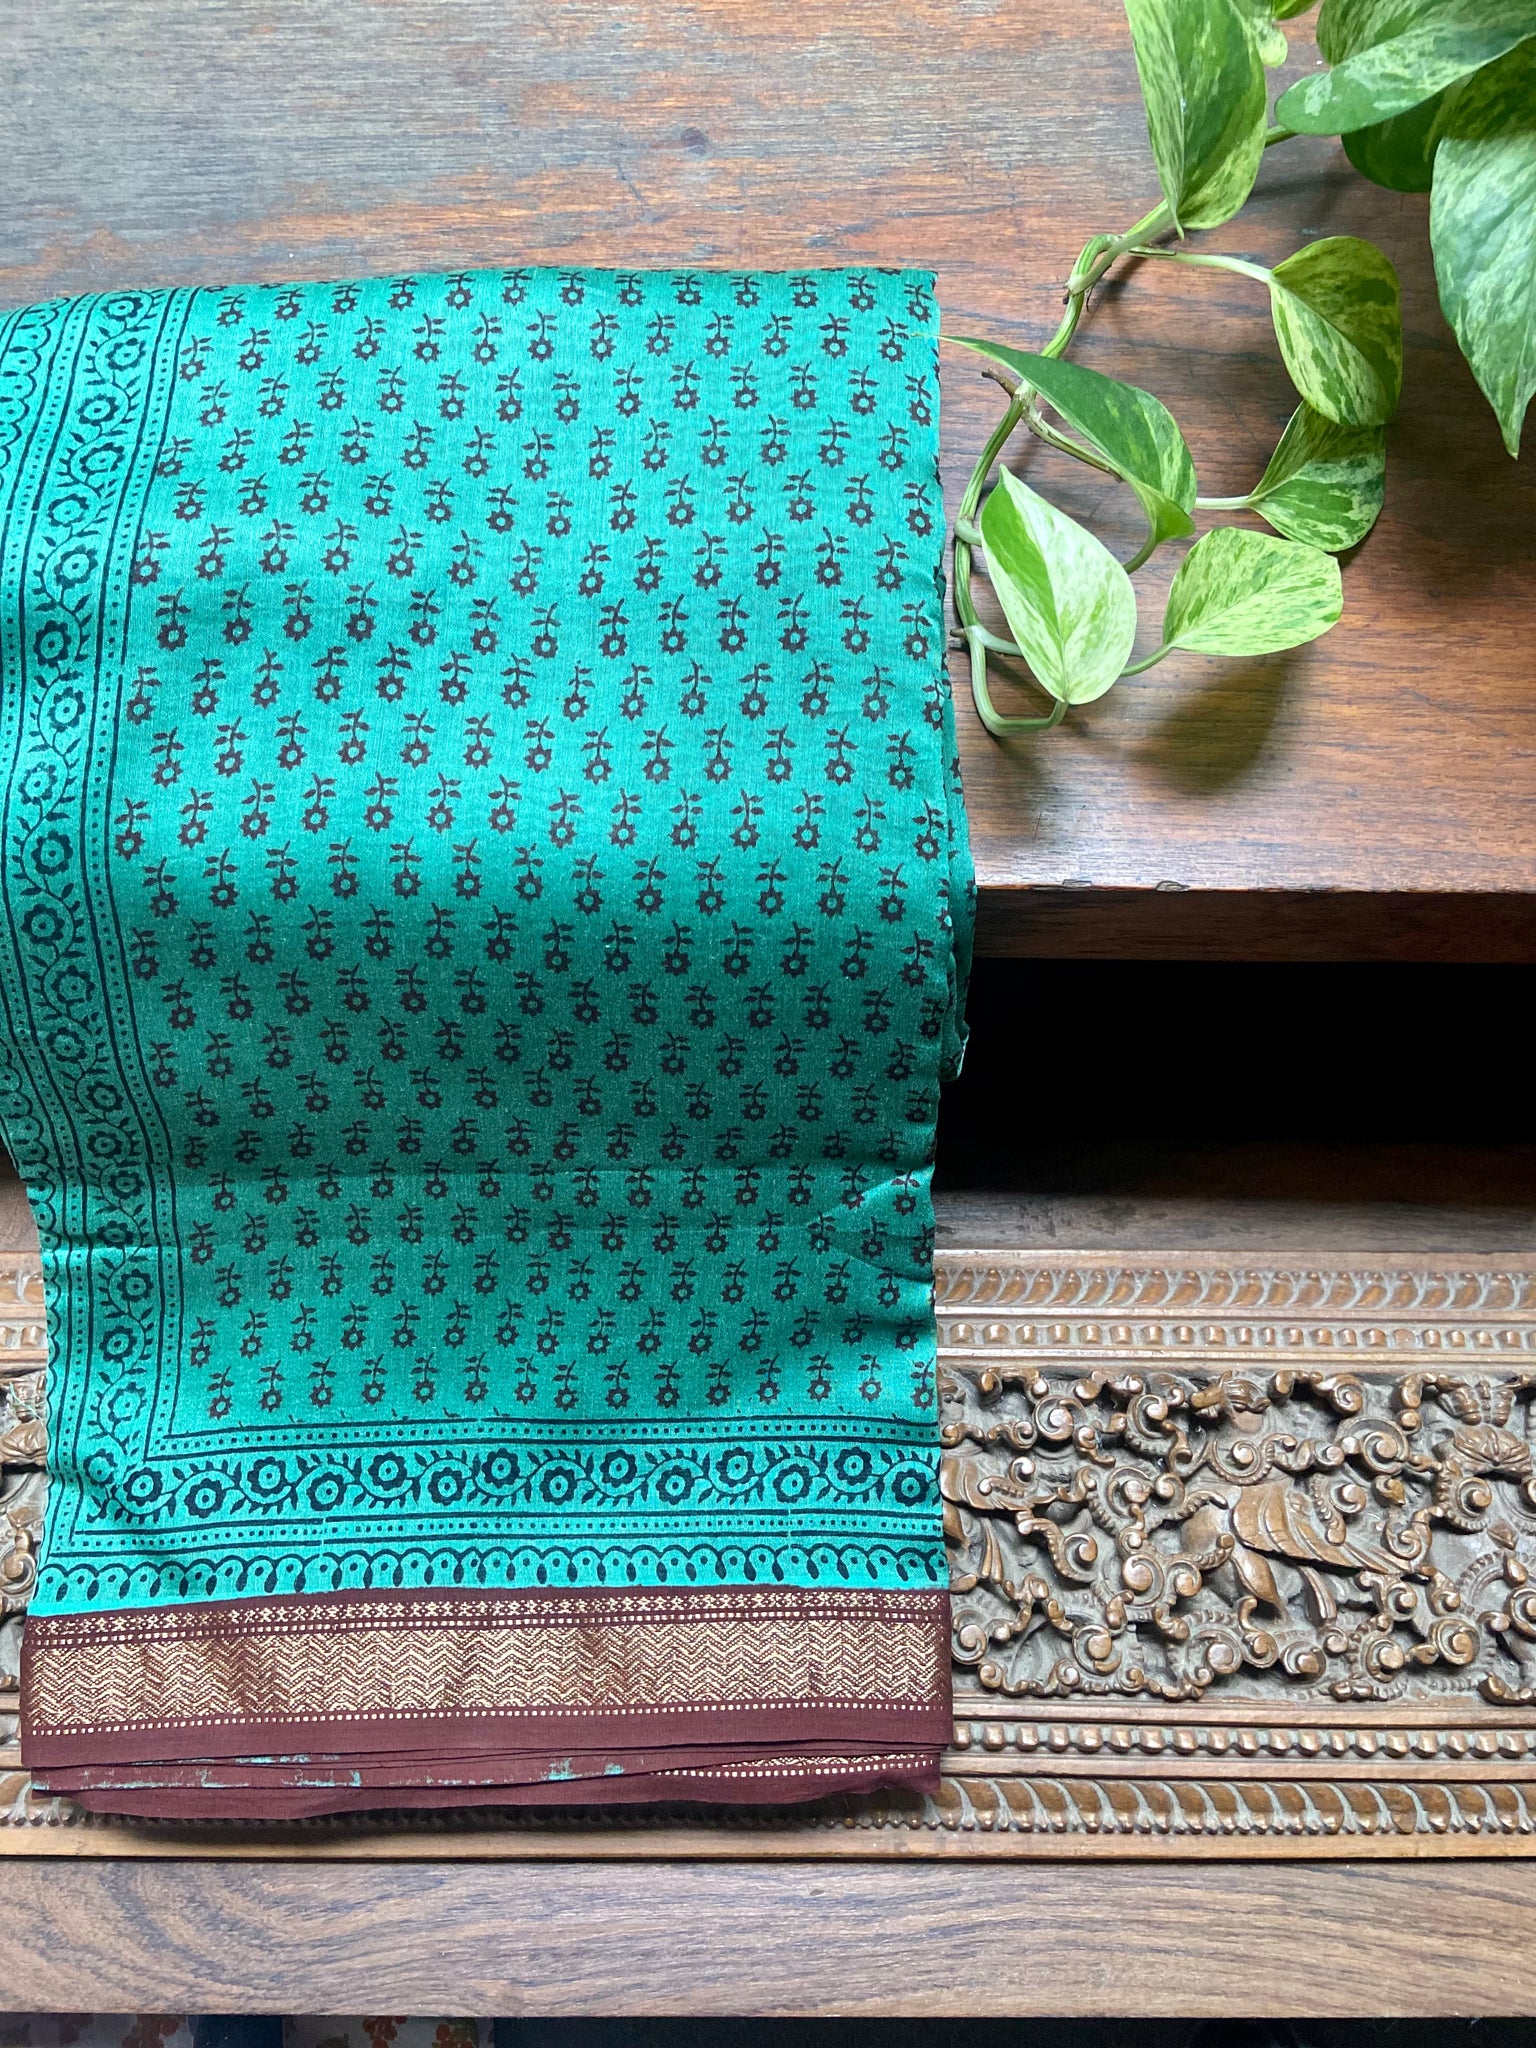 Crafted with a green and dark maroon combination, this elegant Green Bagh printed Maheshwari Saree is a timeless classic. The hand prints offer a unique touch while the Maheshwari silk cotton provides a luxurious look and feel for comfort. Bring timeless style to your wardrobe with this special piece.  Fabric- Silk Cotton